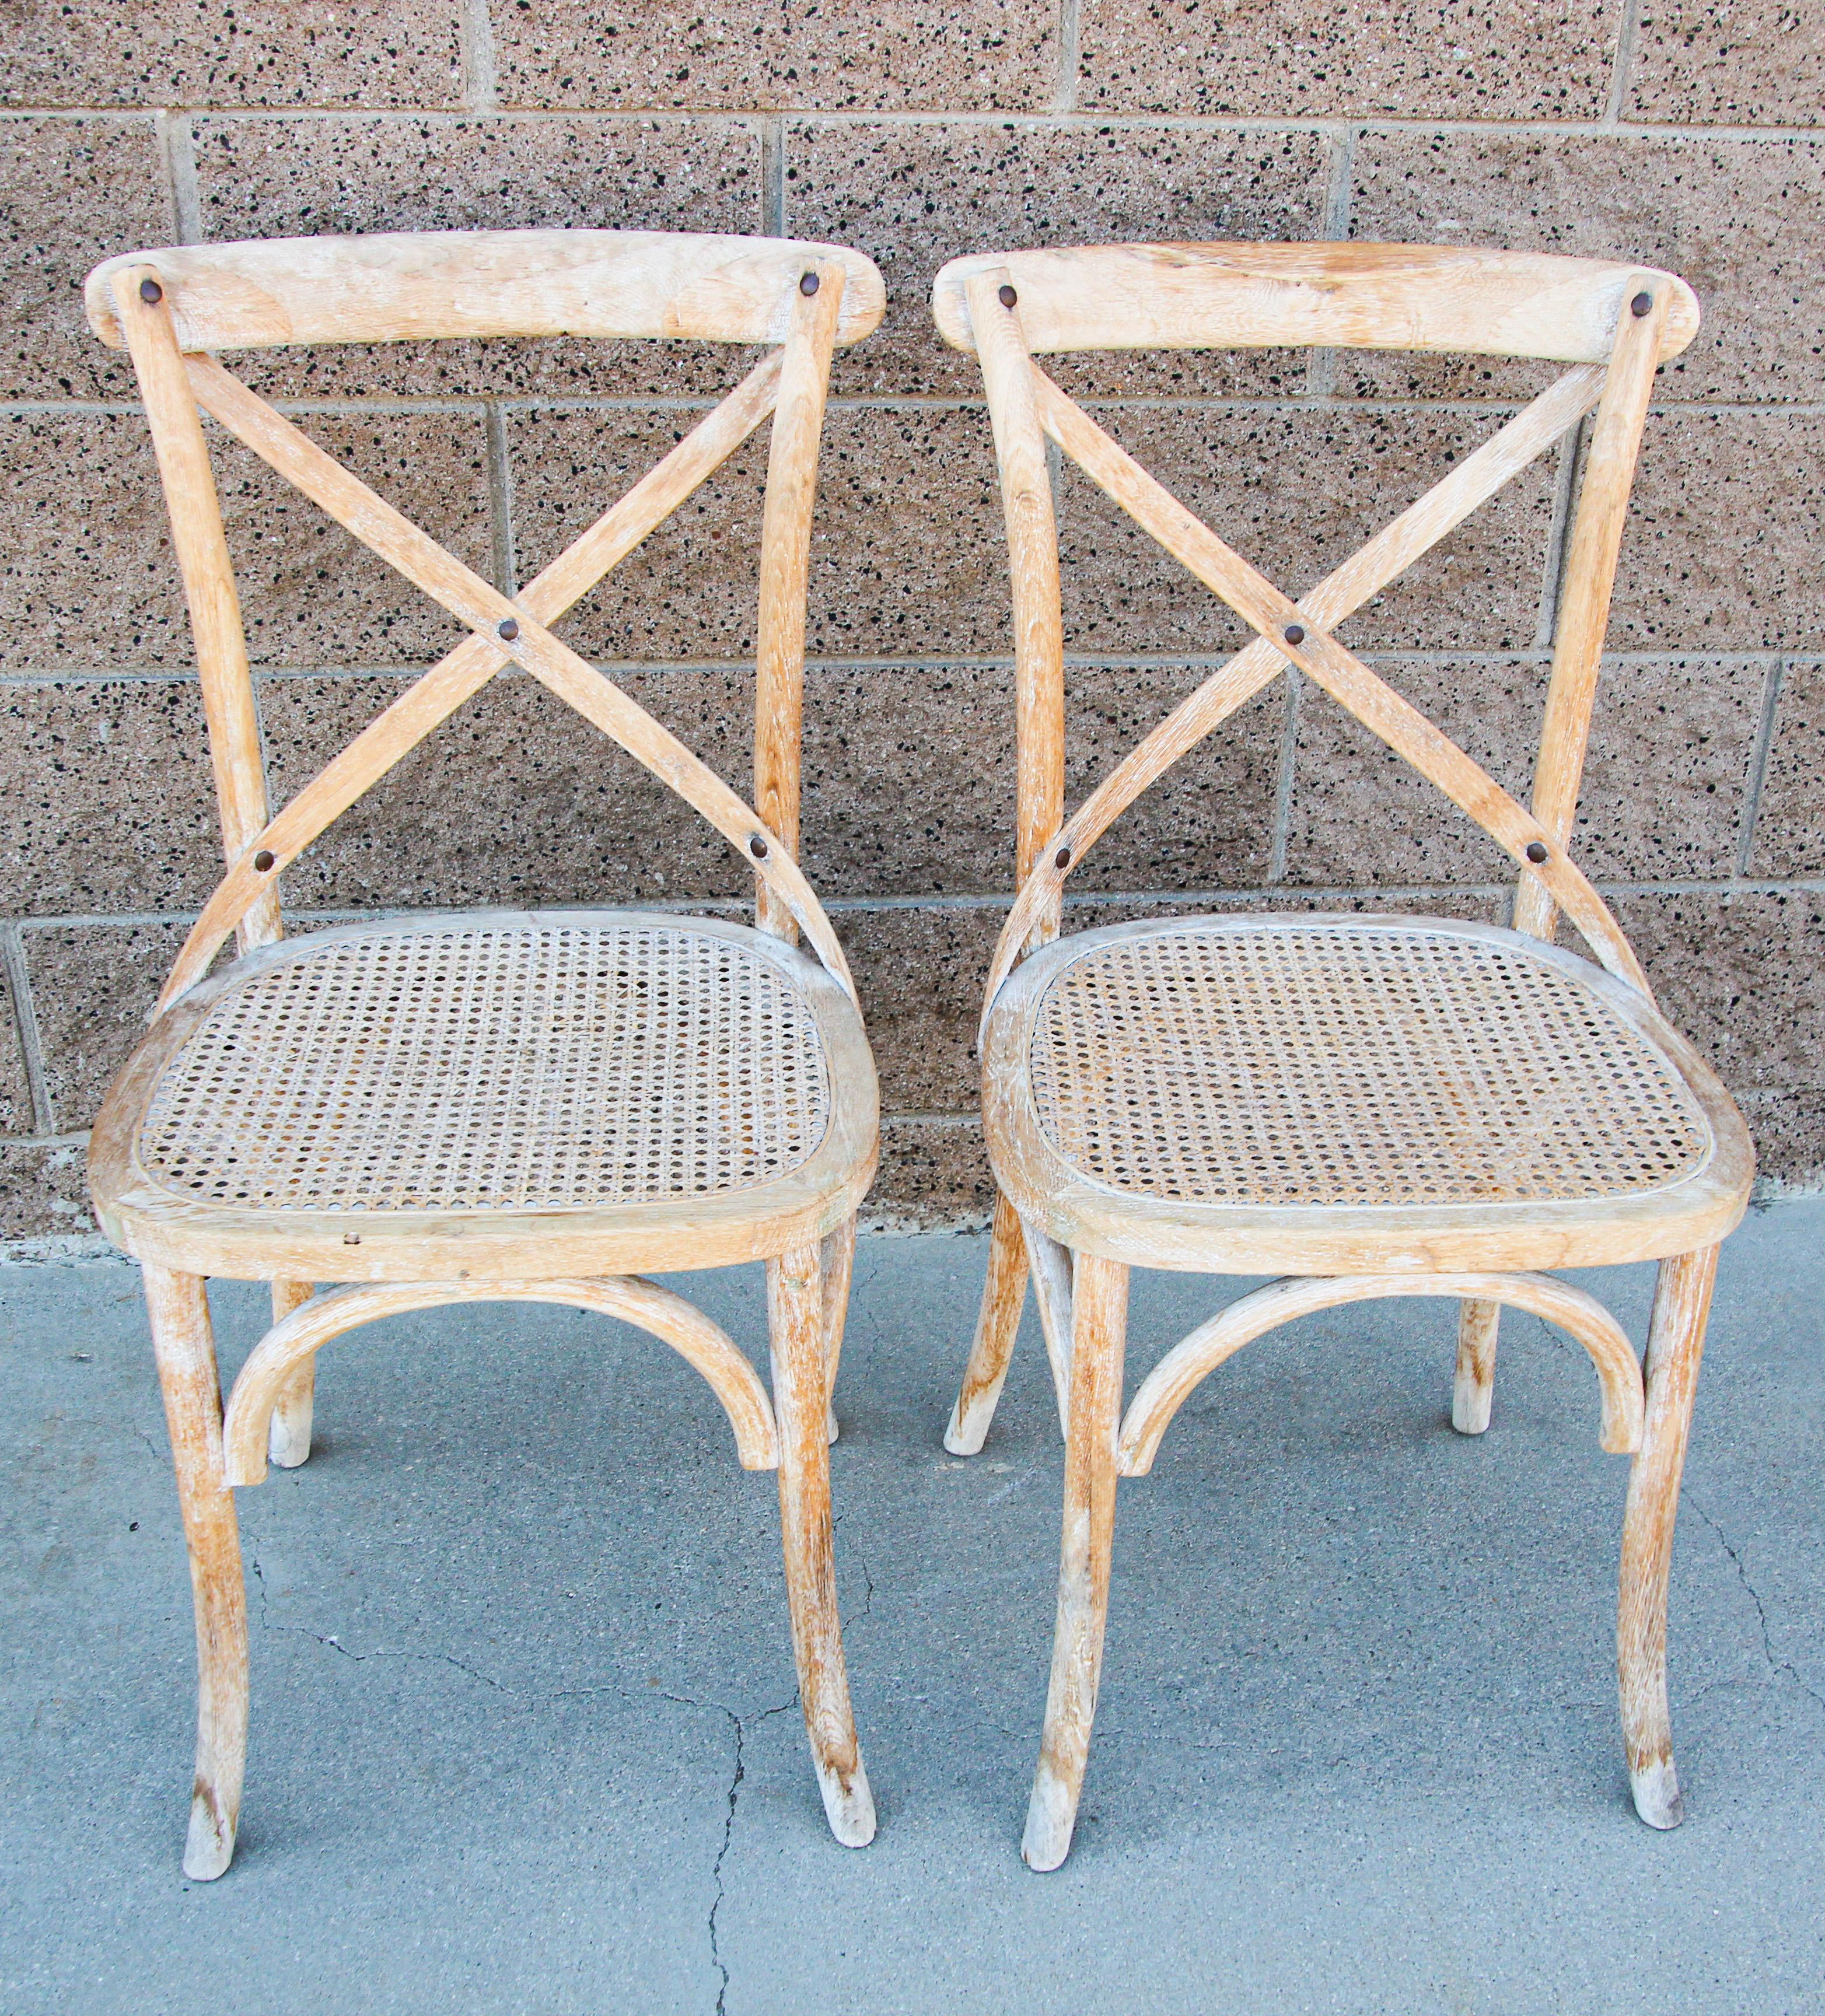 Pair of Provincial French Country style rush seat distressed chairs.
These vintage distressed chairs would give the perfect French European Folk Country provincial look.
Rustic style farm country style pine distresses antique look with woven